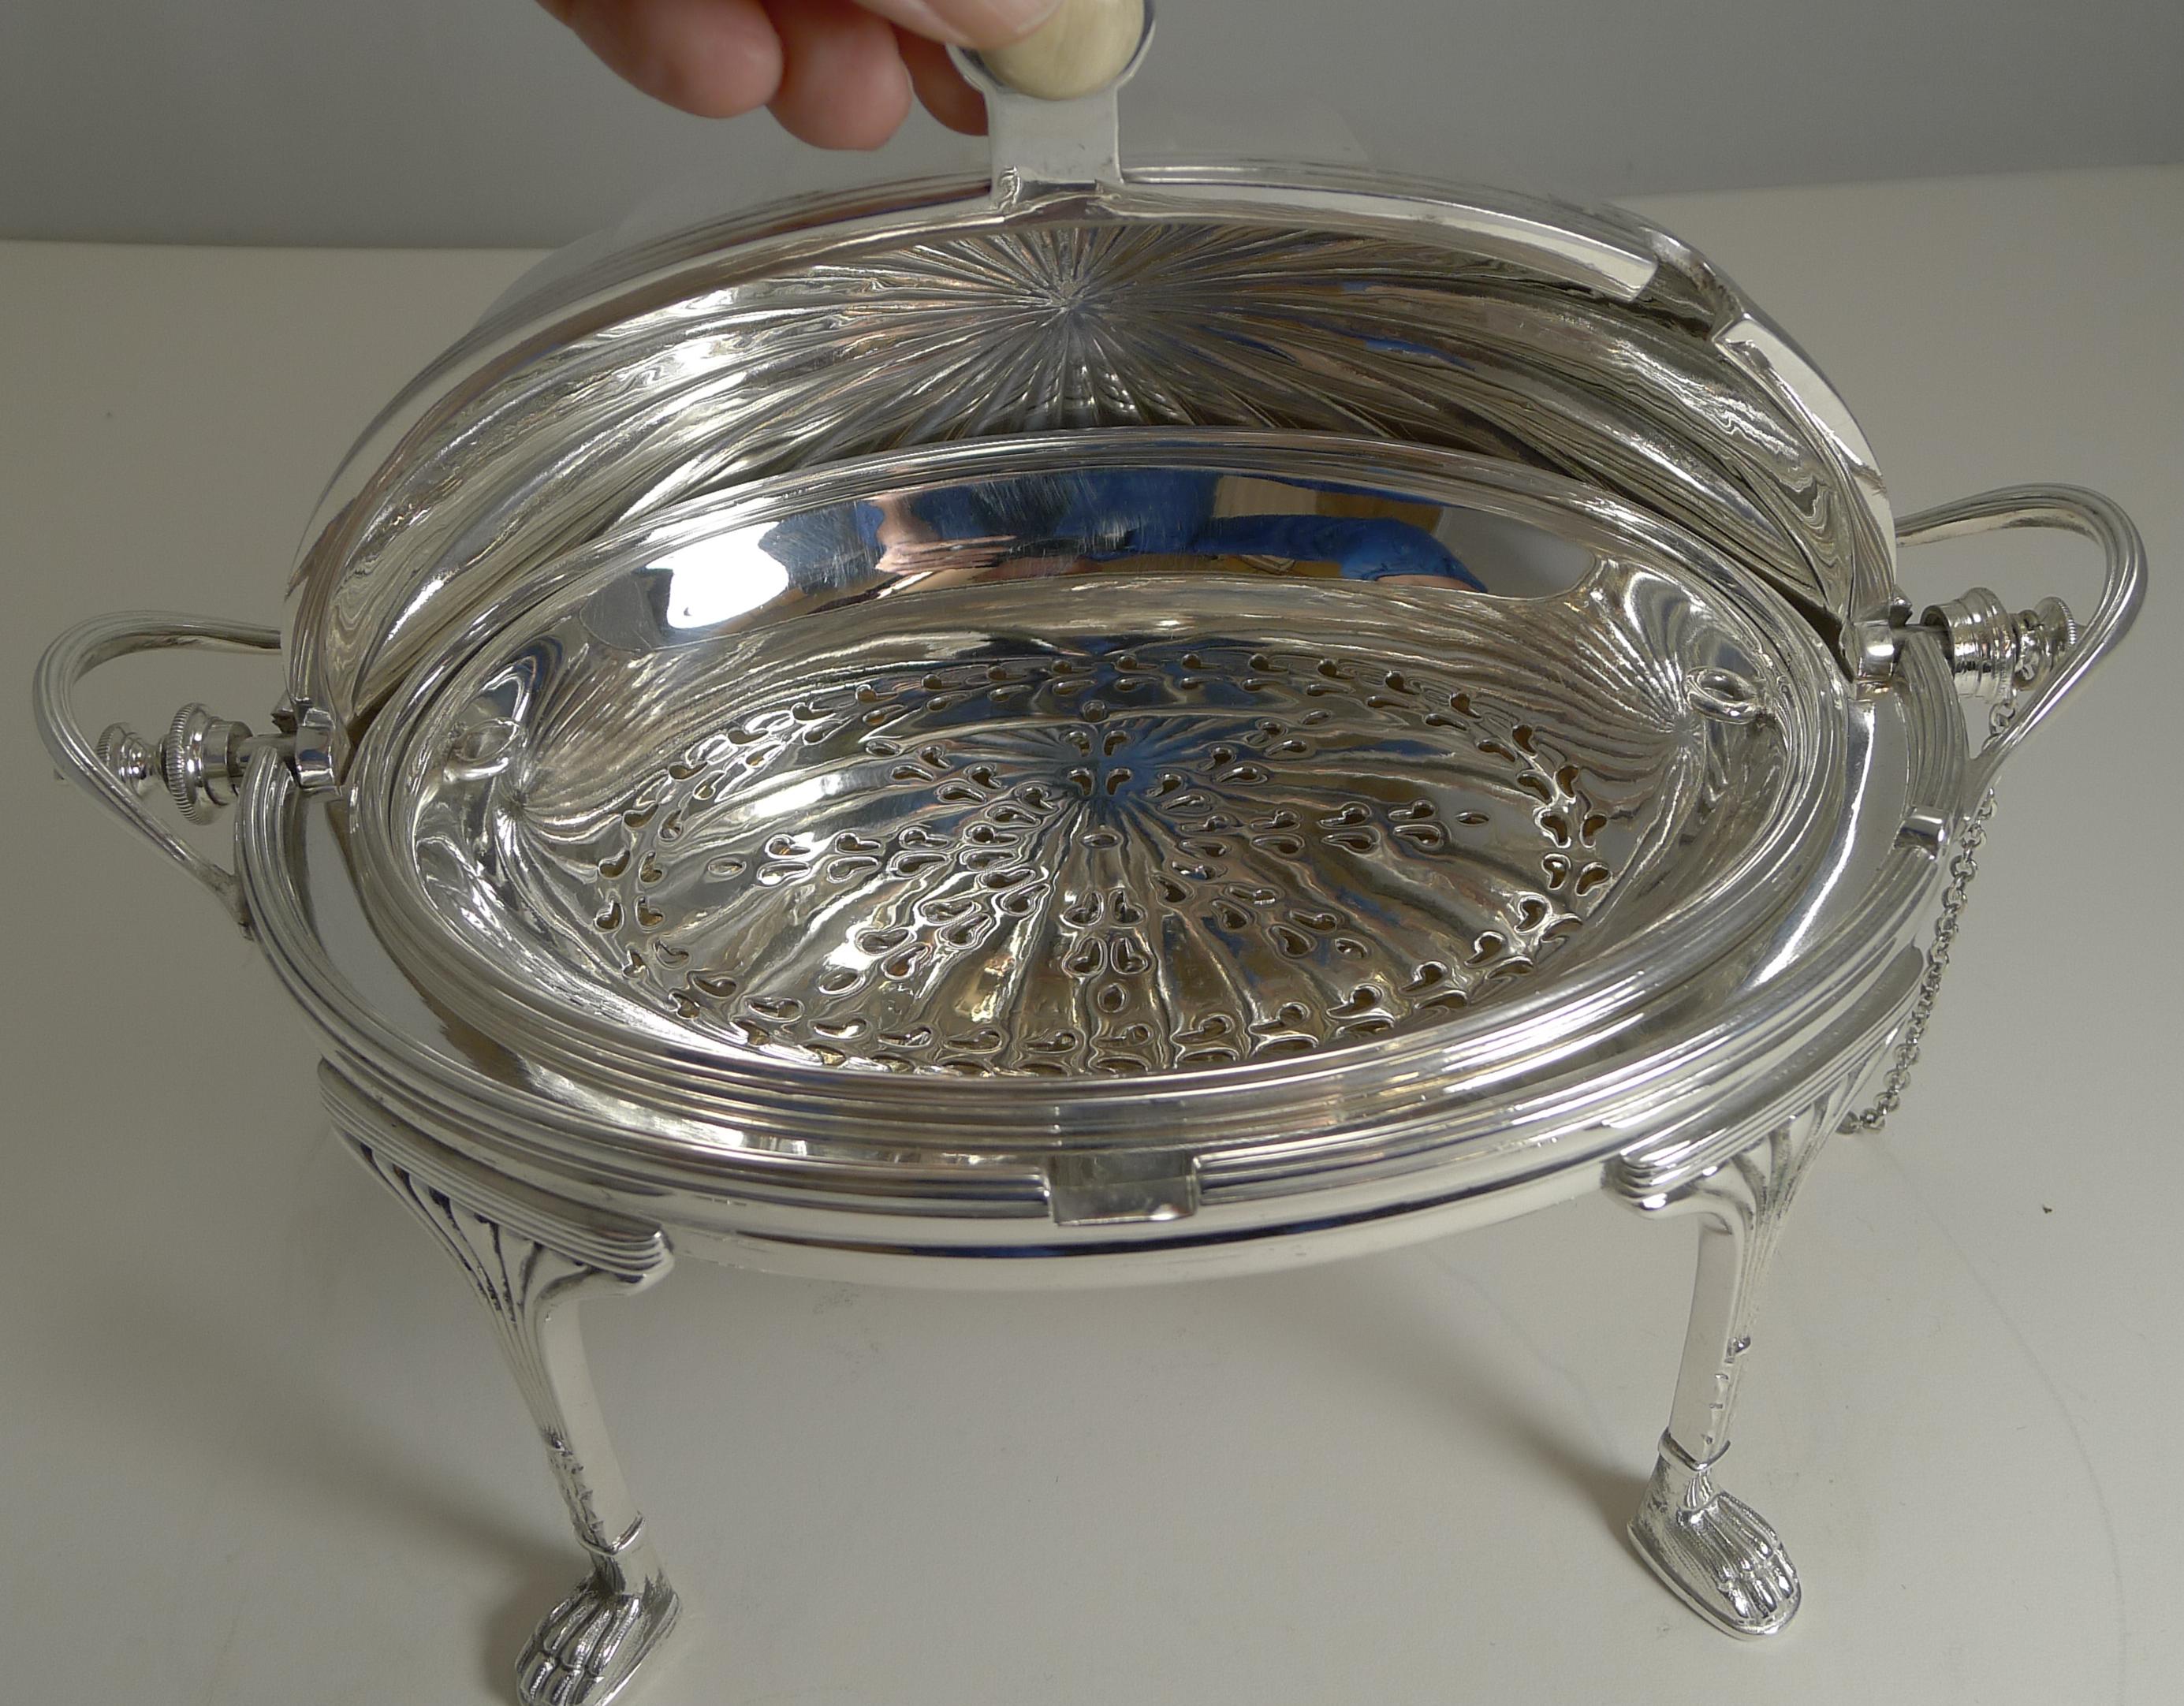 Antique English Silver Plated Revolving Breakfast / Serving Dish, Mappin & Webb 2